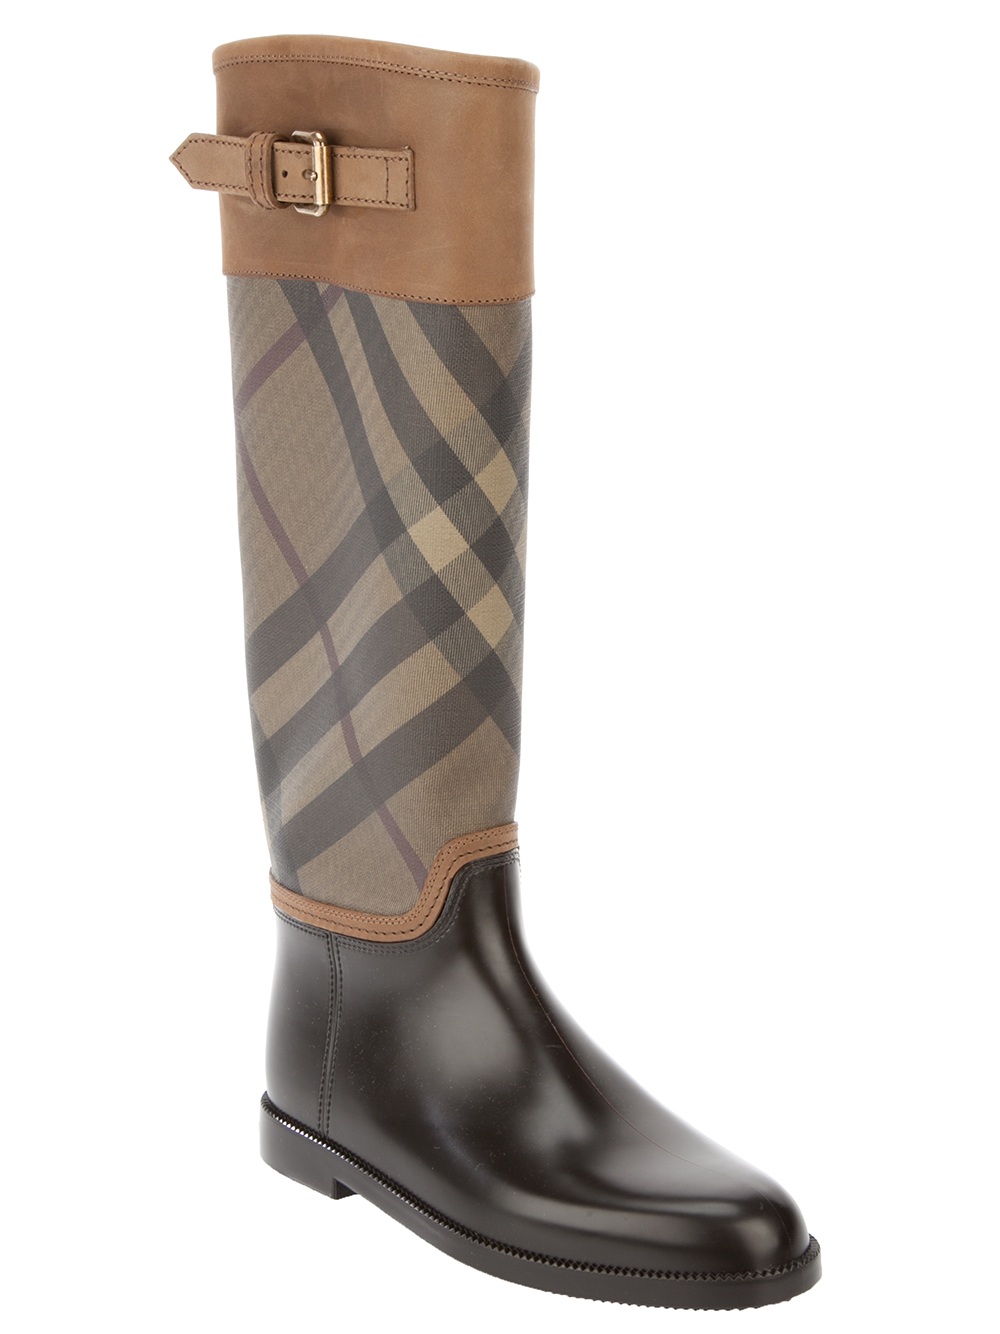 Burberry Brit Knee-high Boot in Brown | Lyst